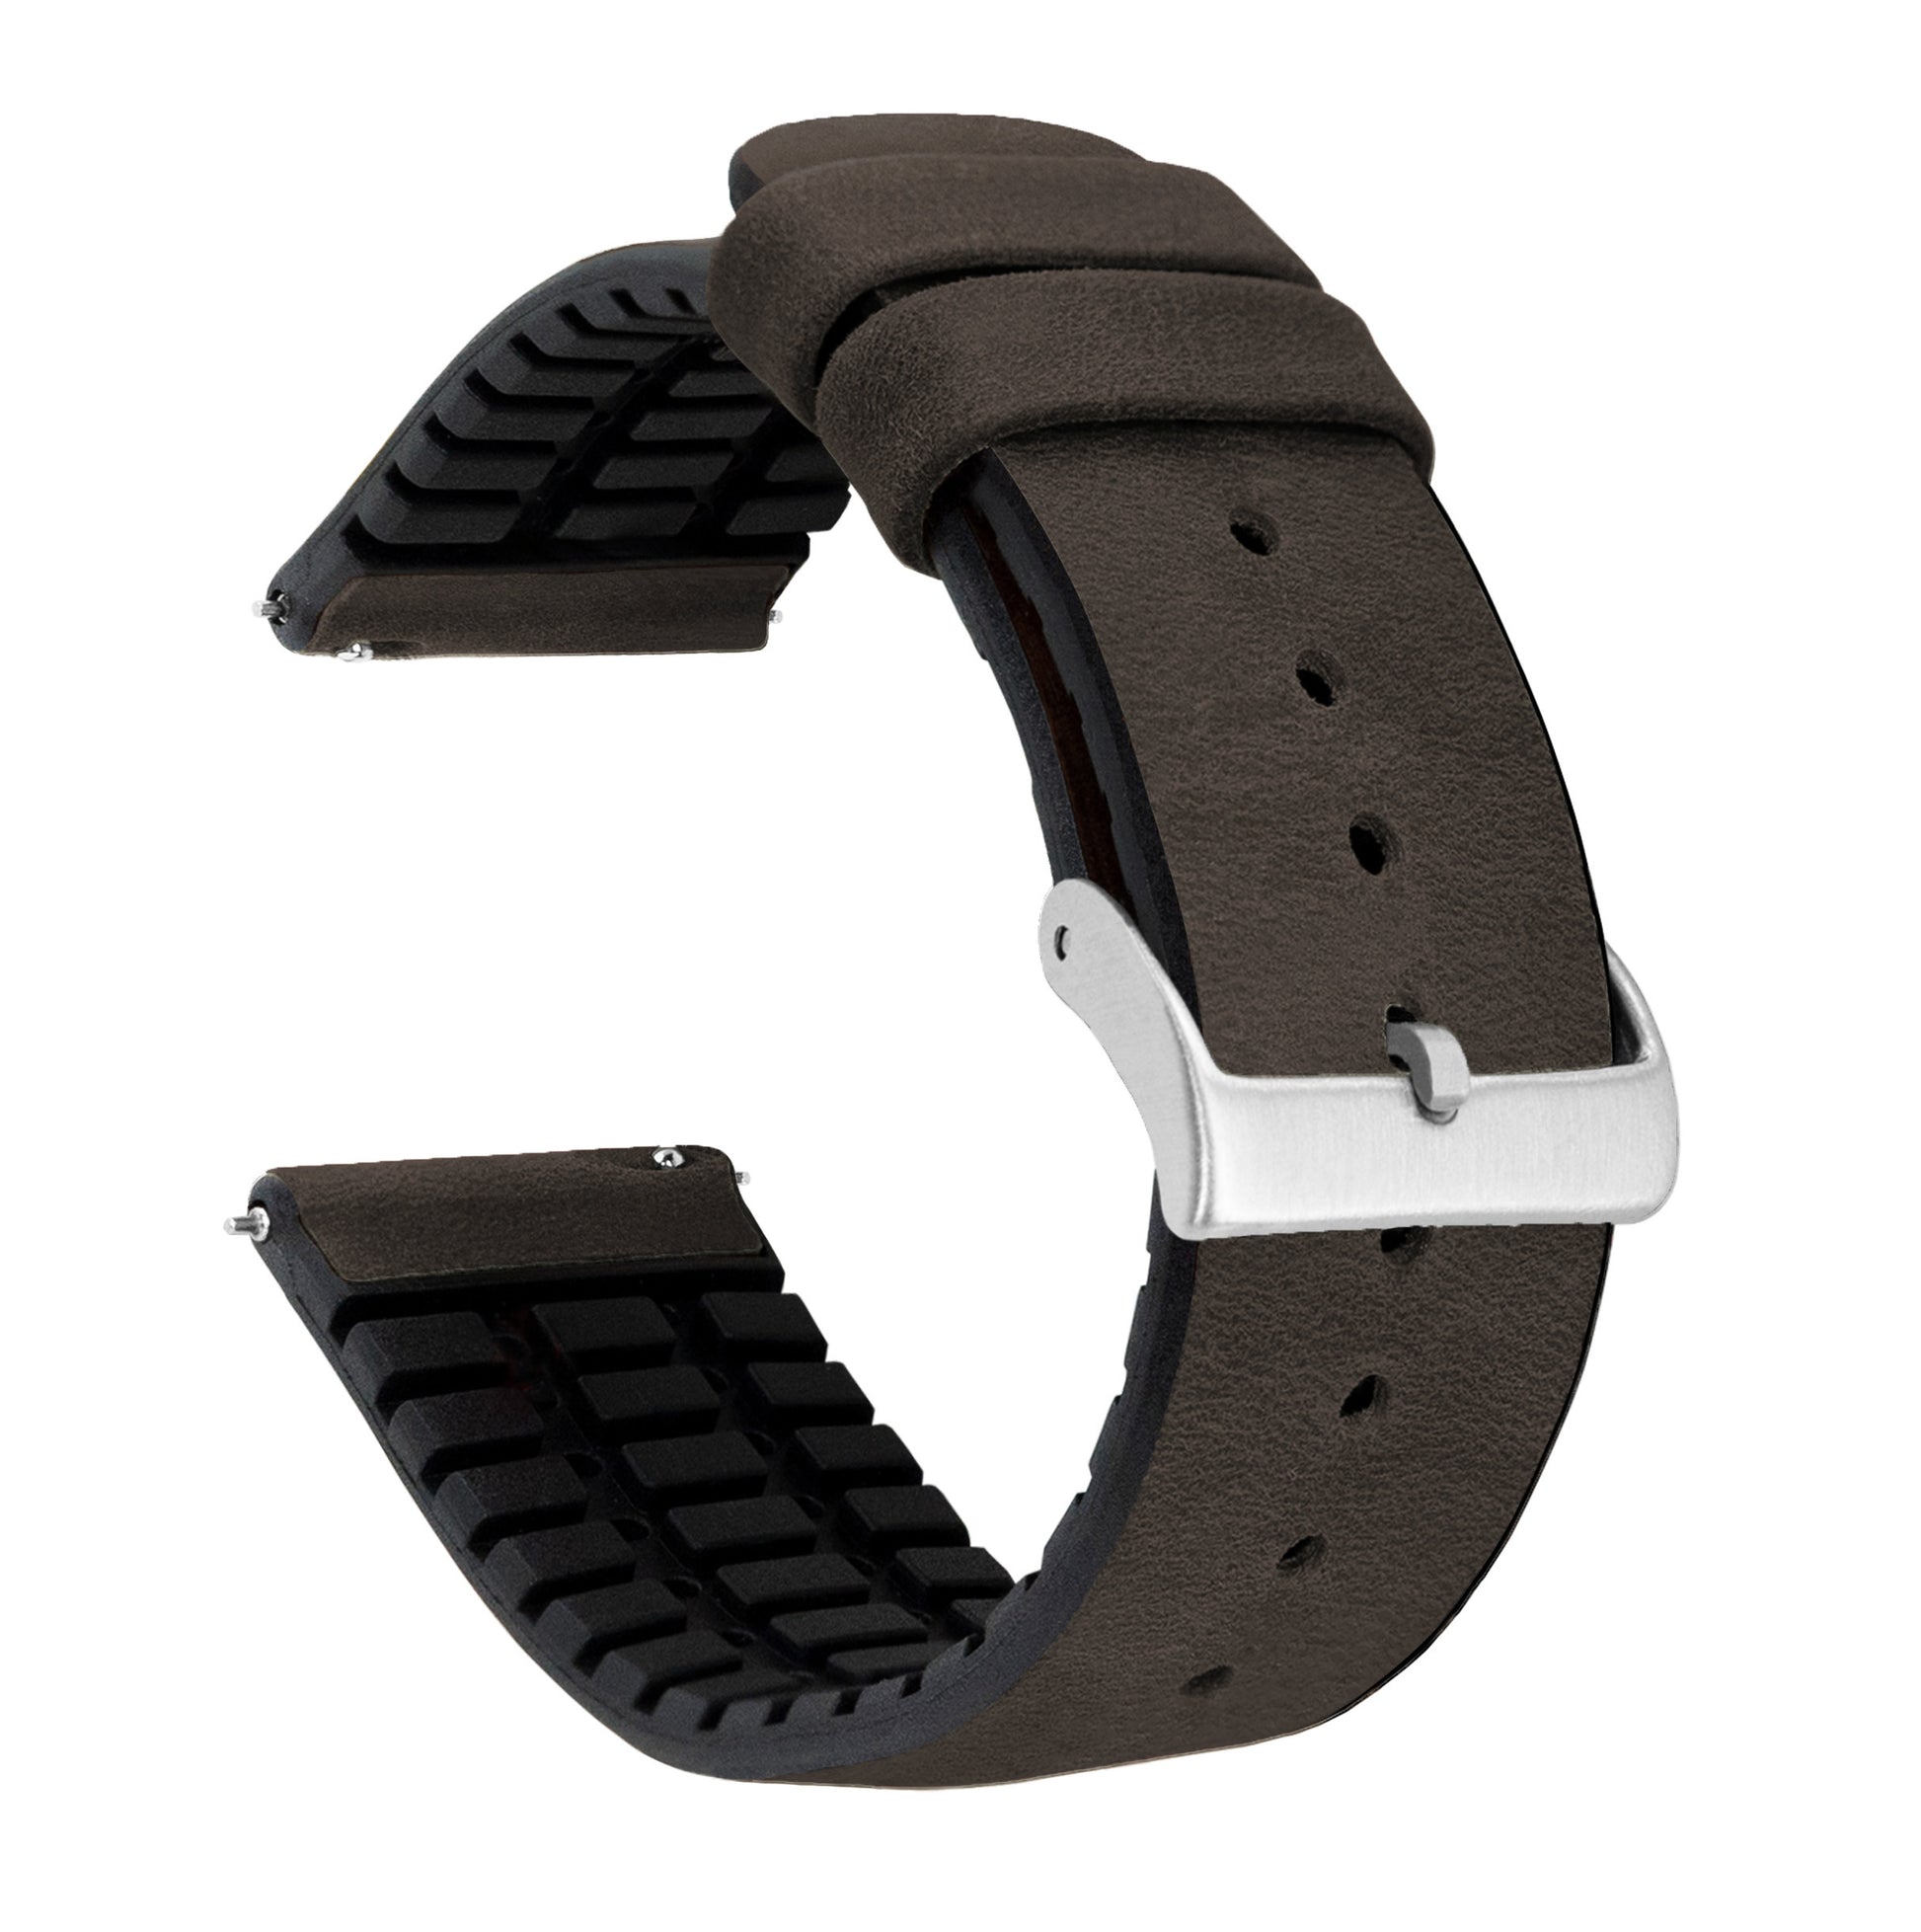 Fossil Sport | Leather and Rubber Hybrid | Smoke Brown - Barton Watch Bands